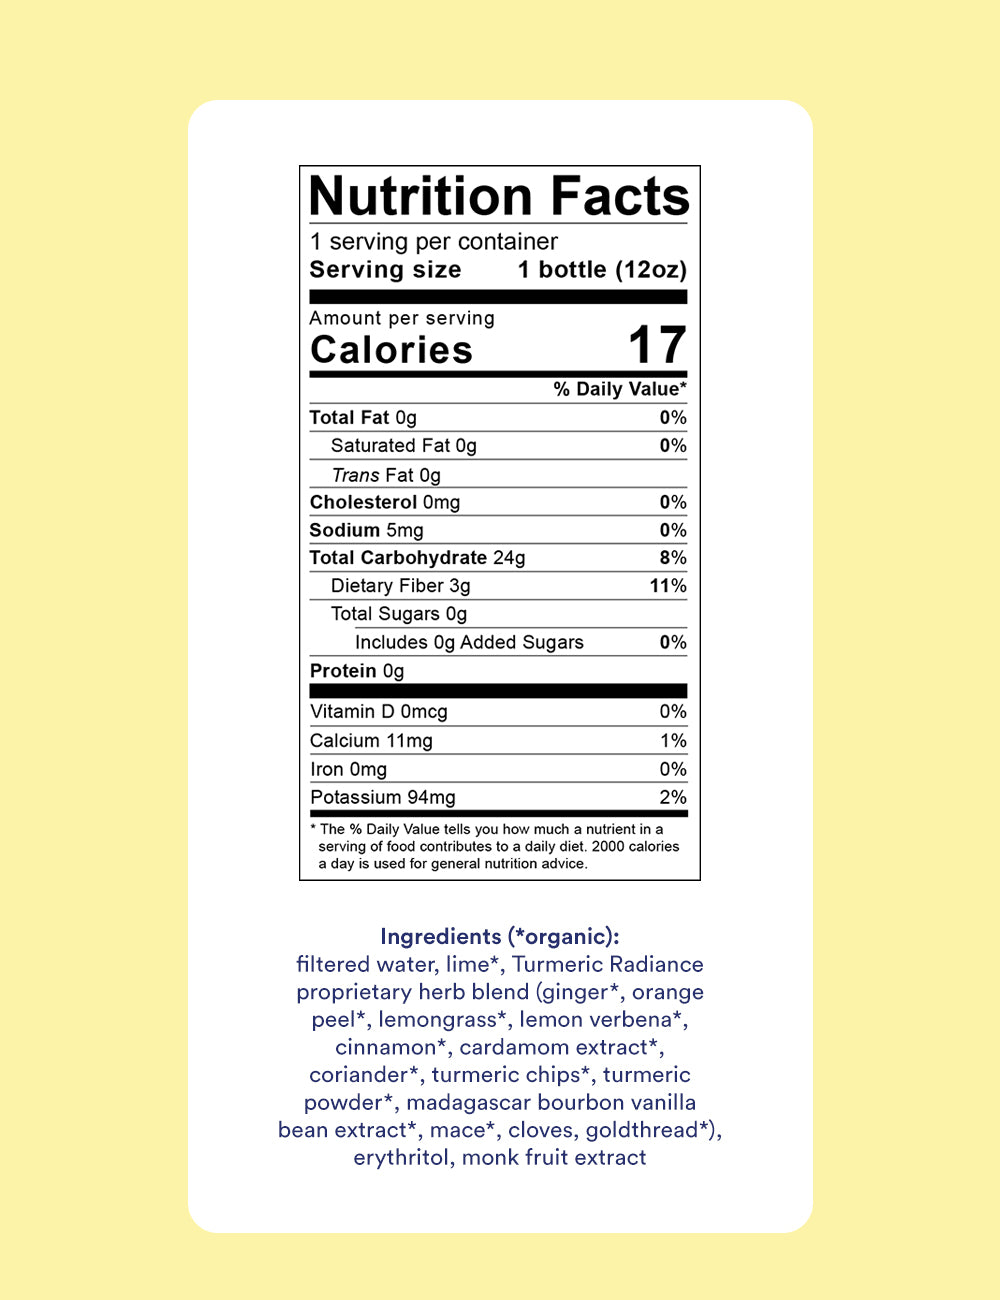 Turmeric Radiance Nutritional Facts